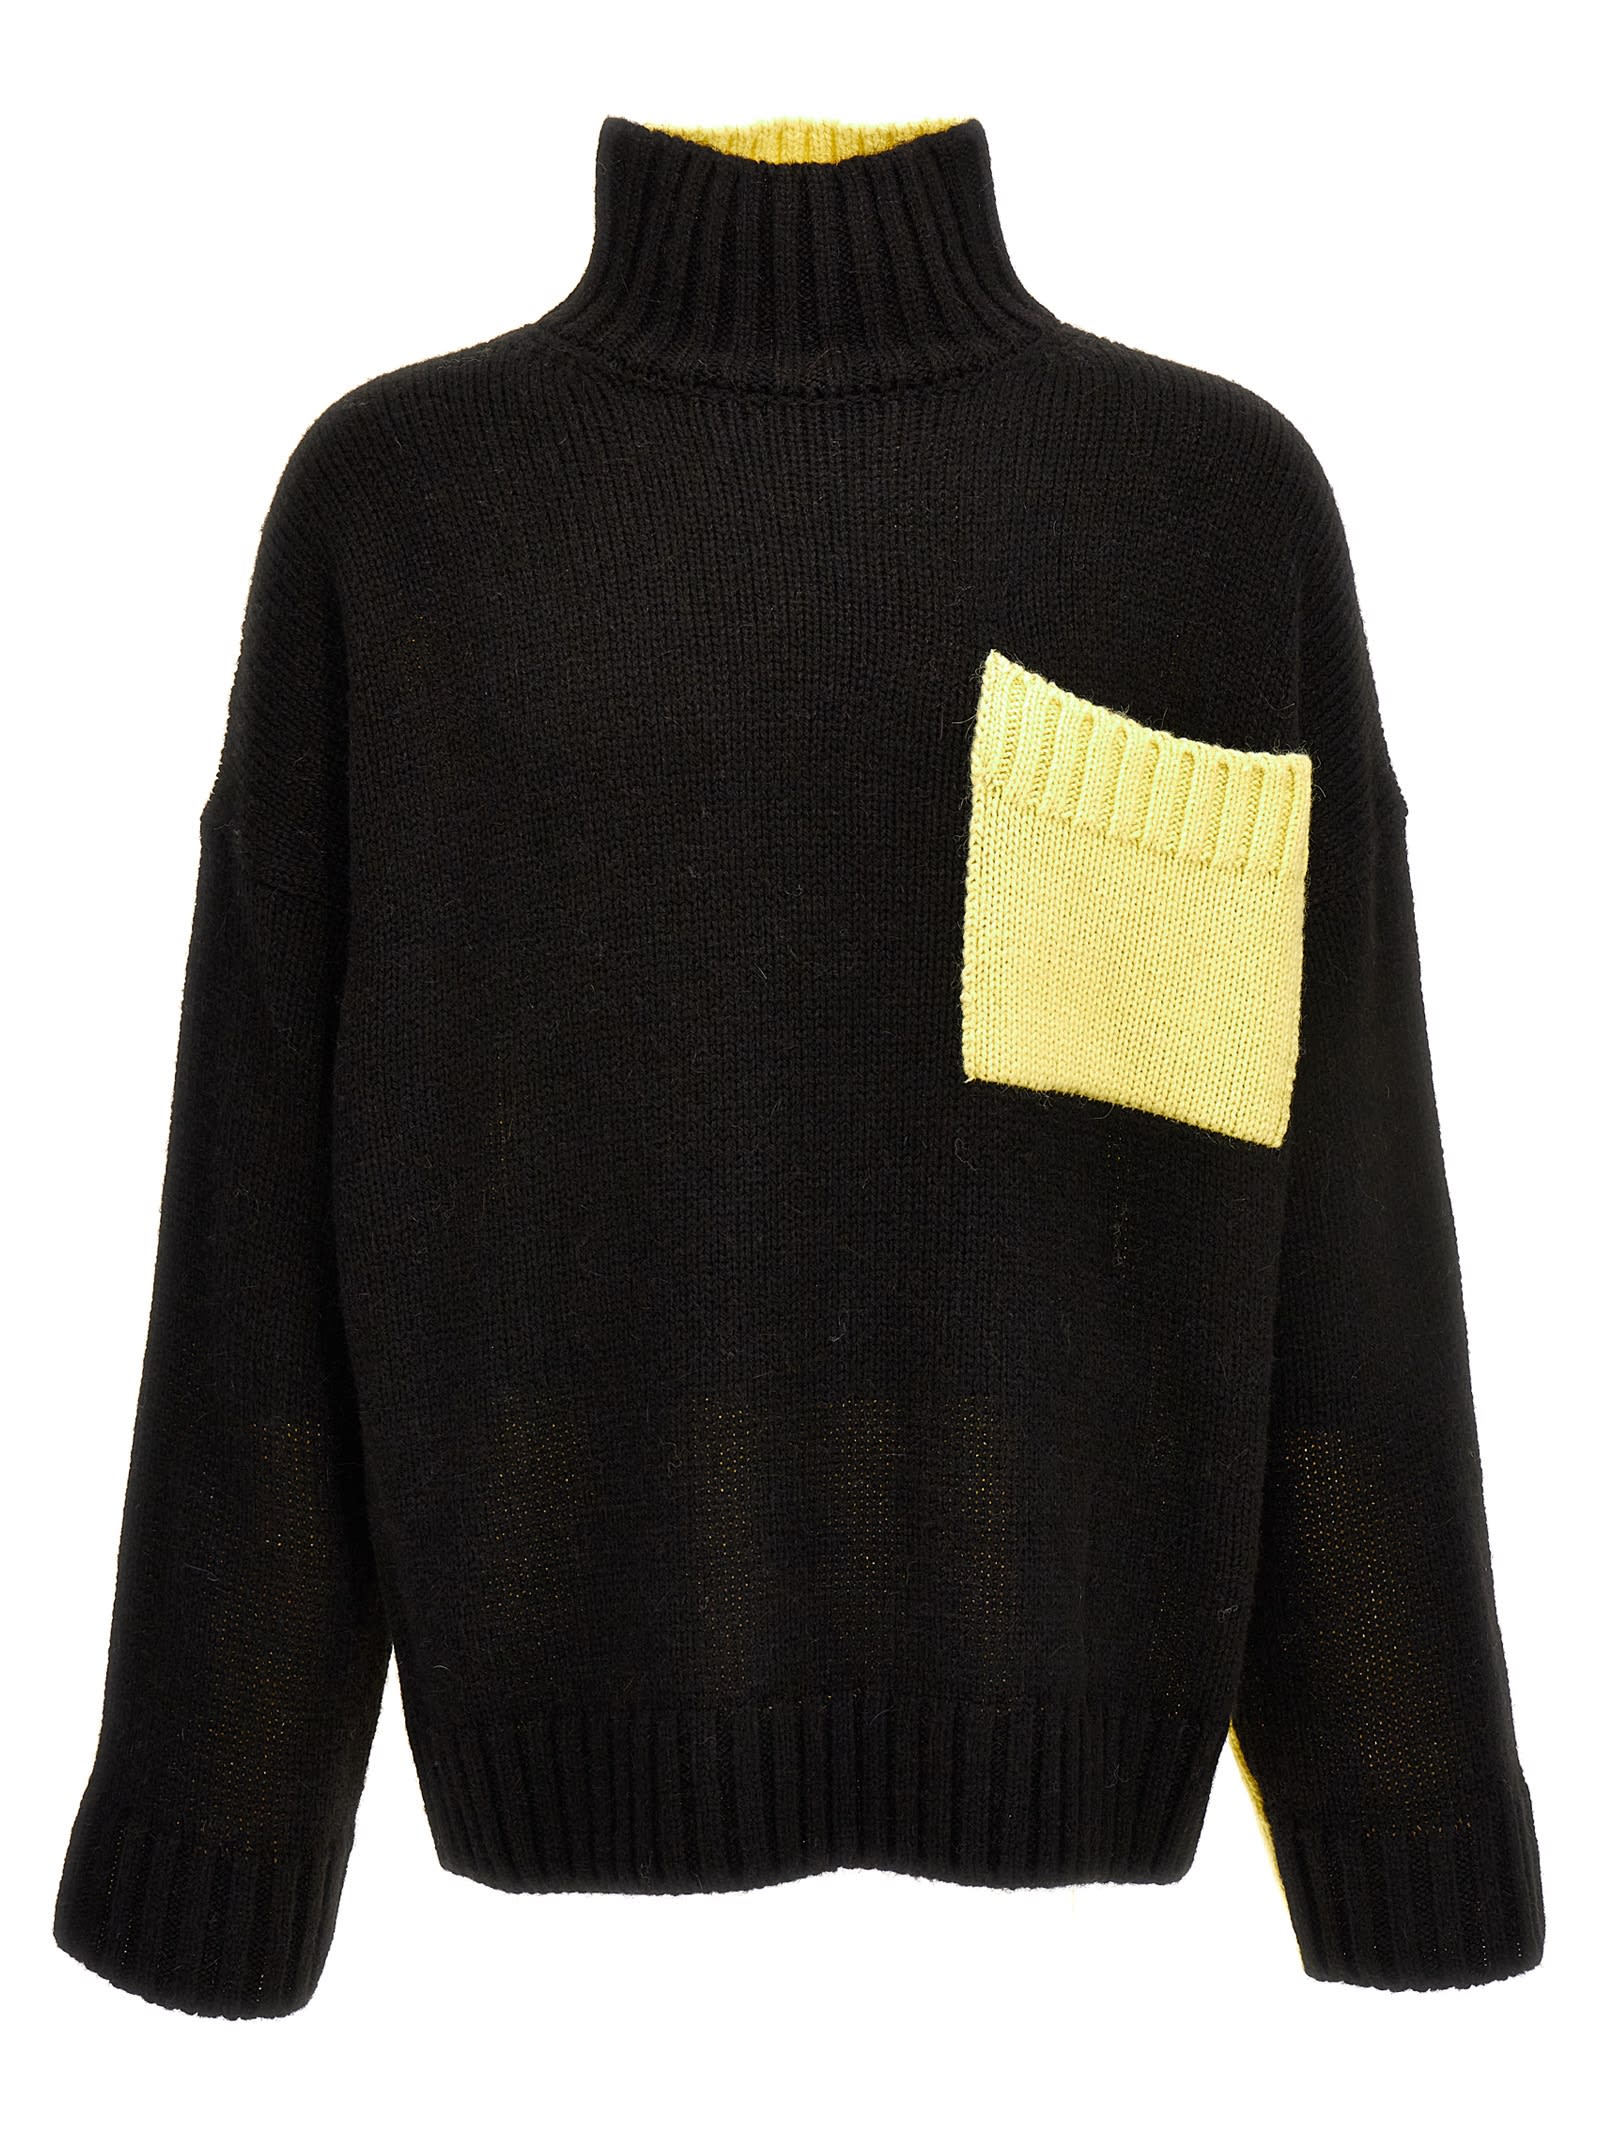 JW ANDERSON LOGO EMBROIDERY TWO-COLOR SWEATER